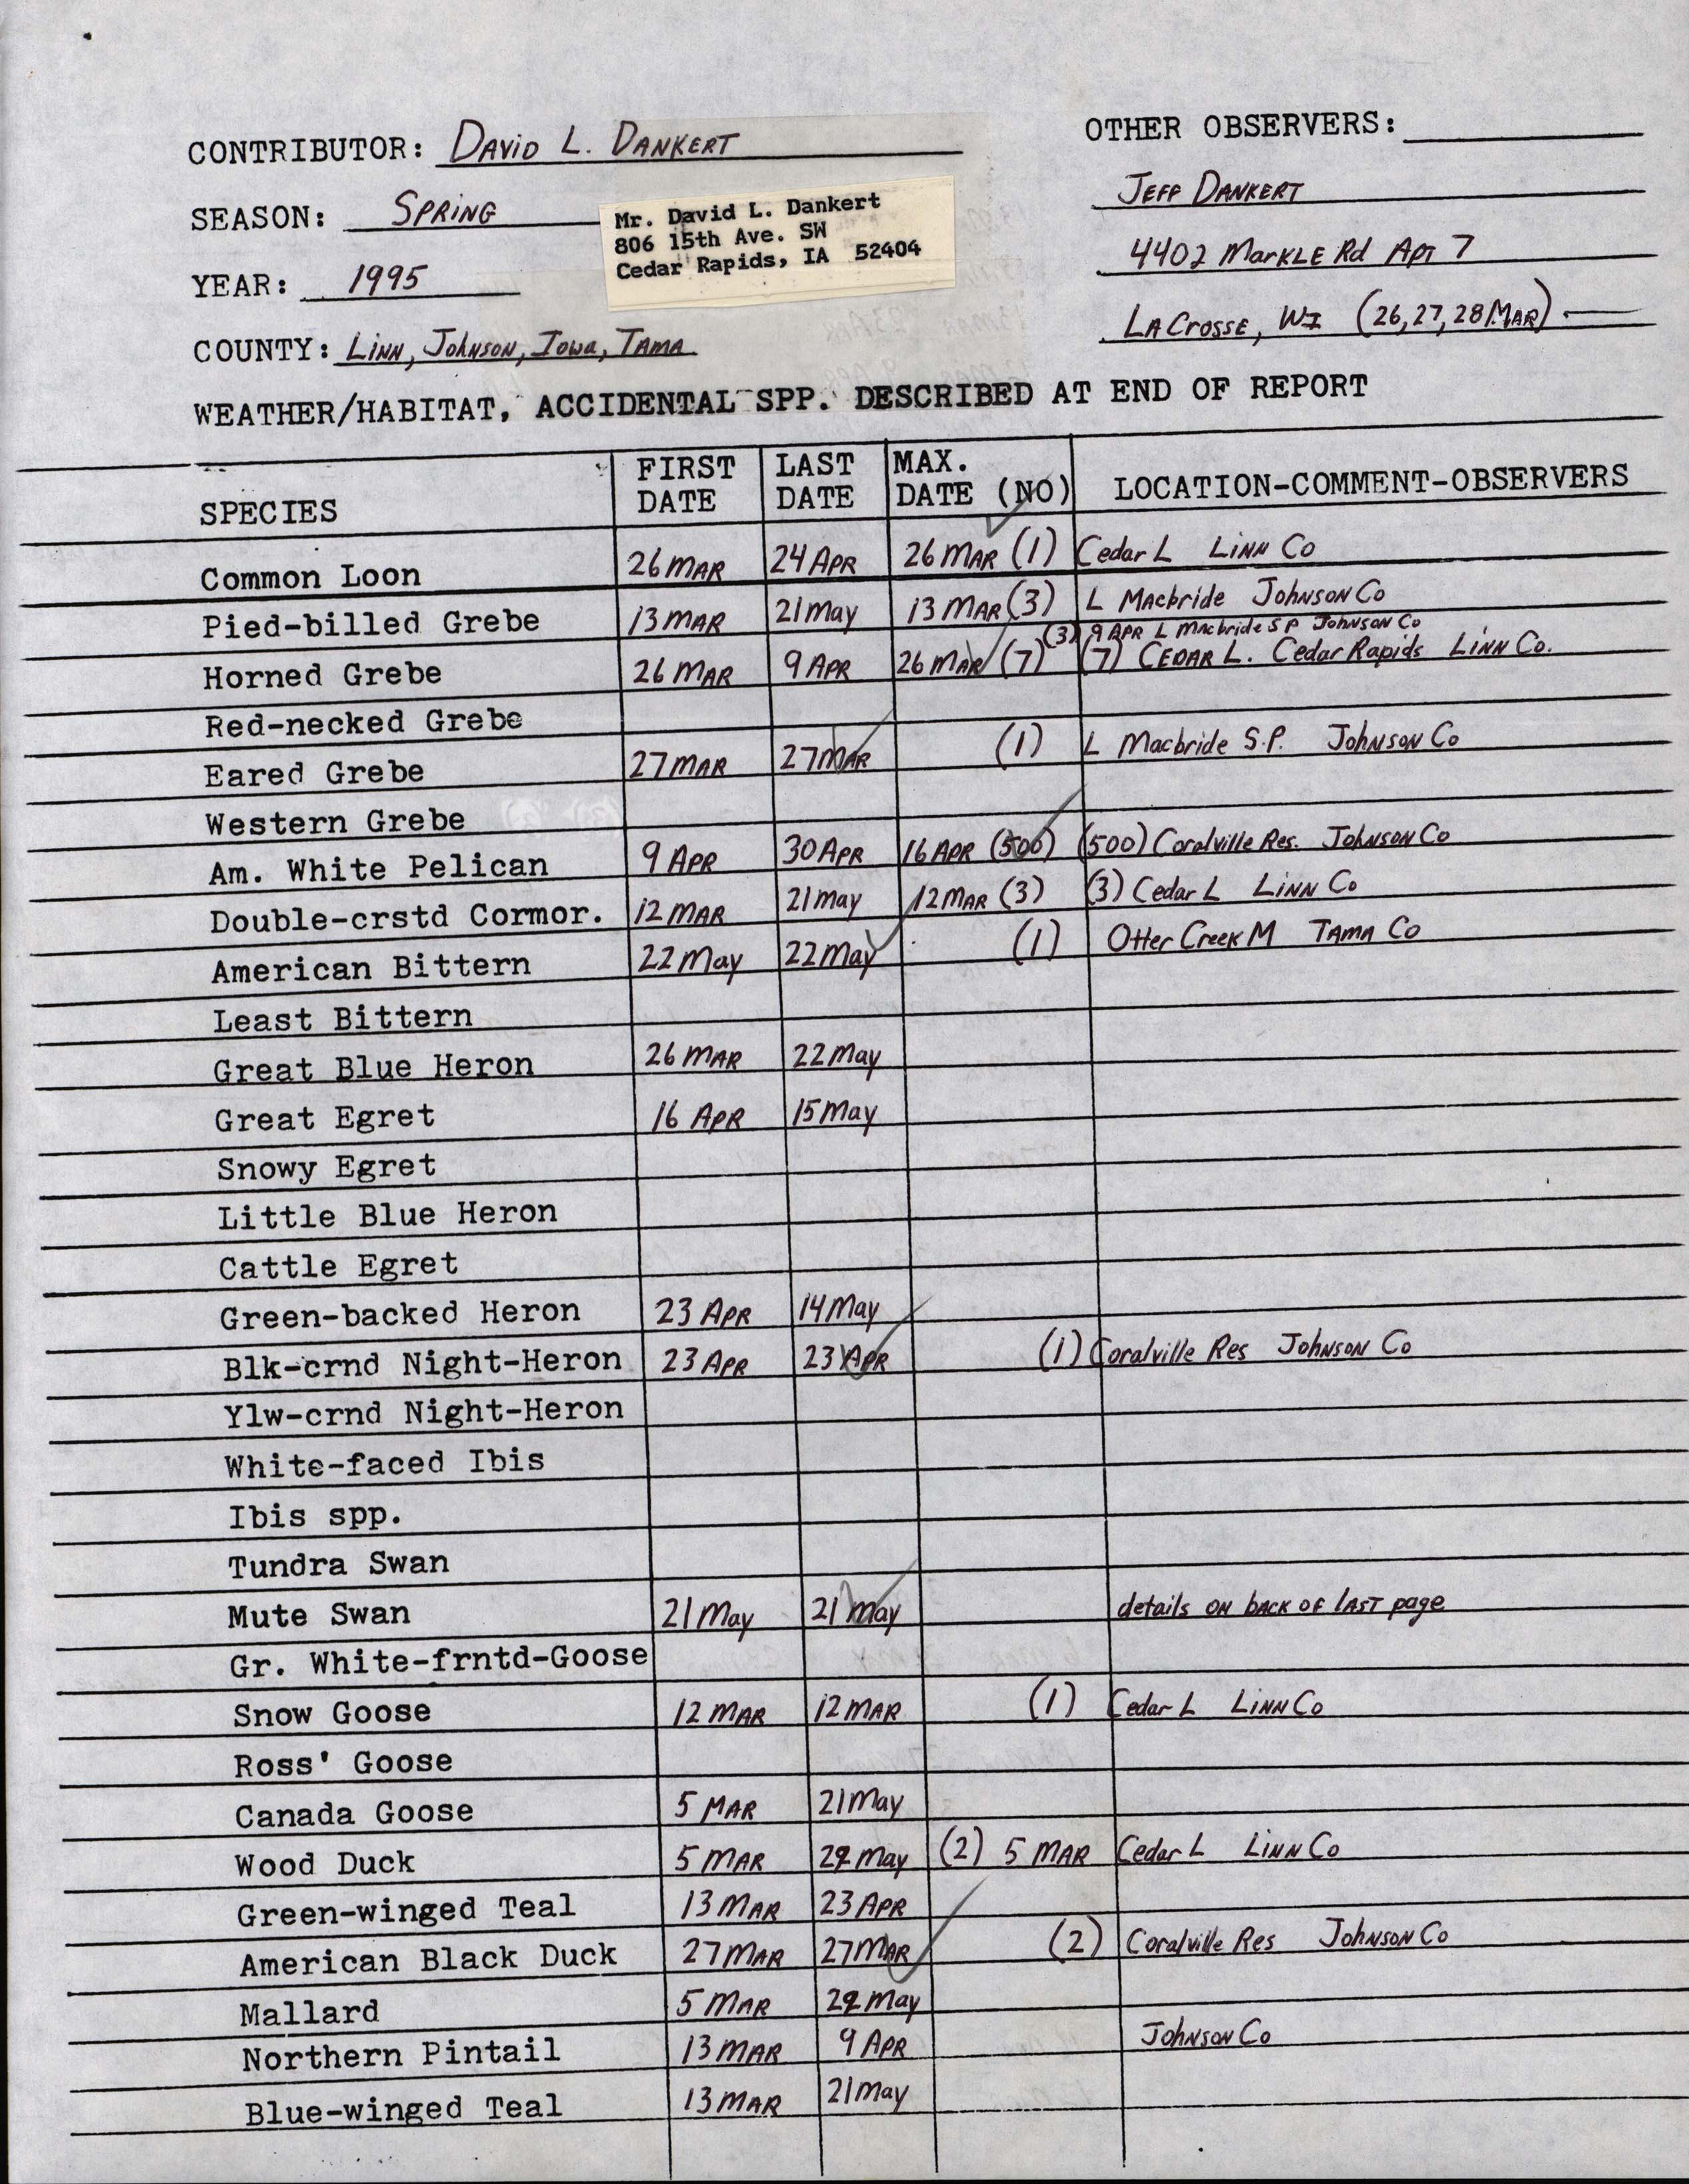 Field reports form for submitting seasonal observations of Iowa birds, spring 1995, David Dankert